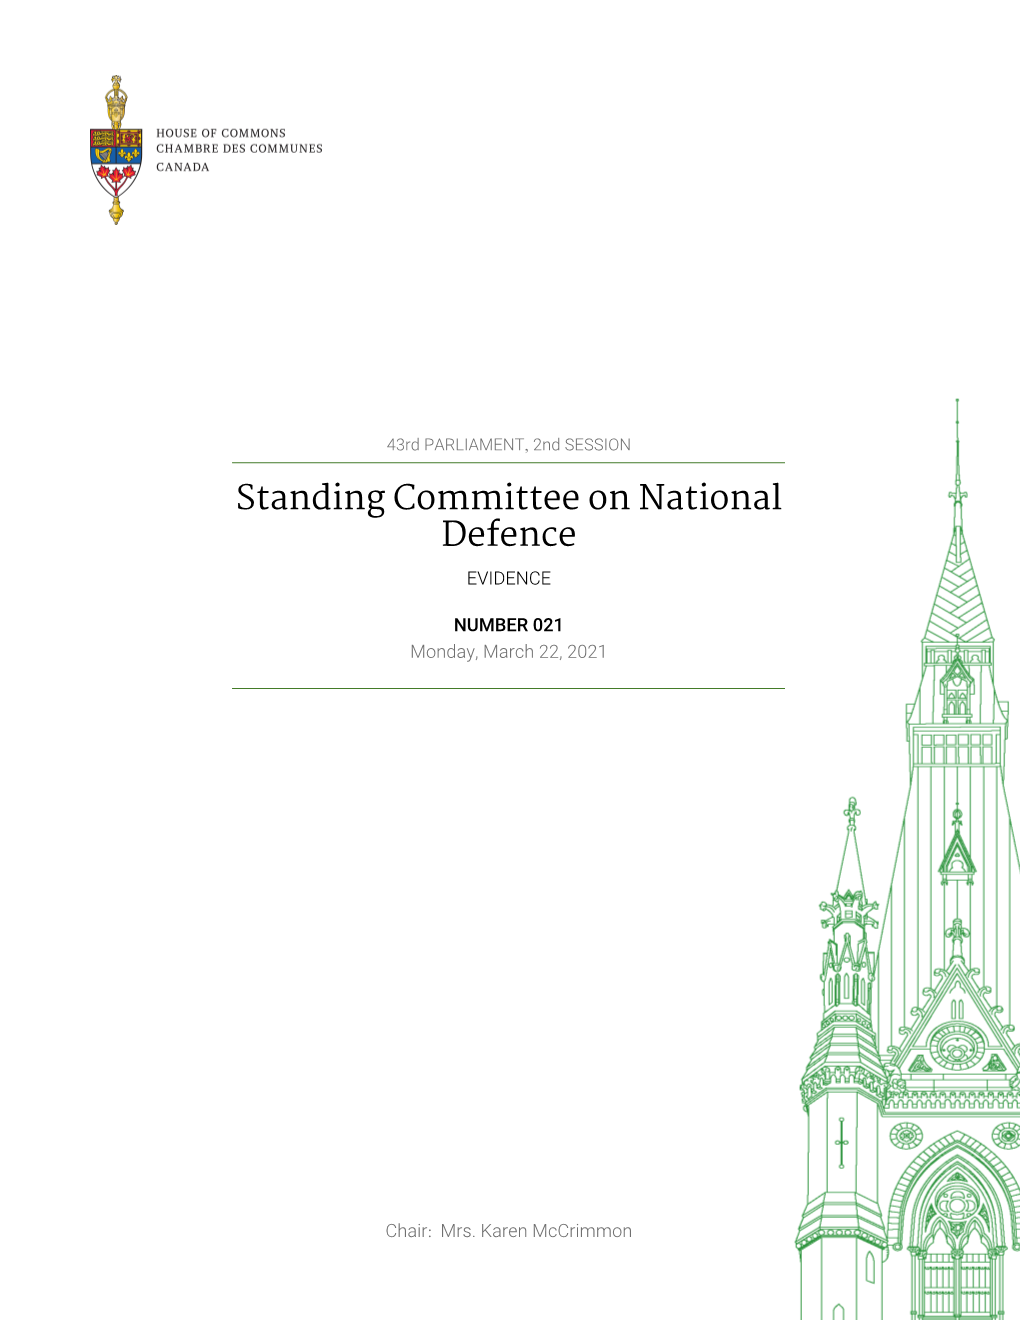 Evidence of the Standing Committee on National